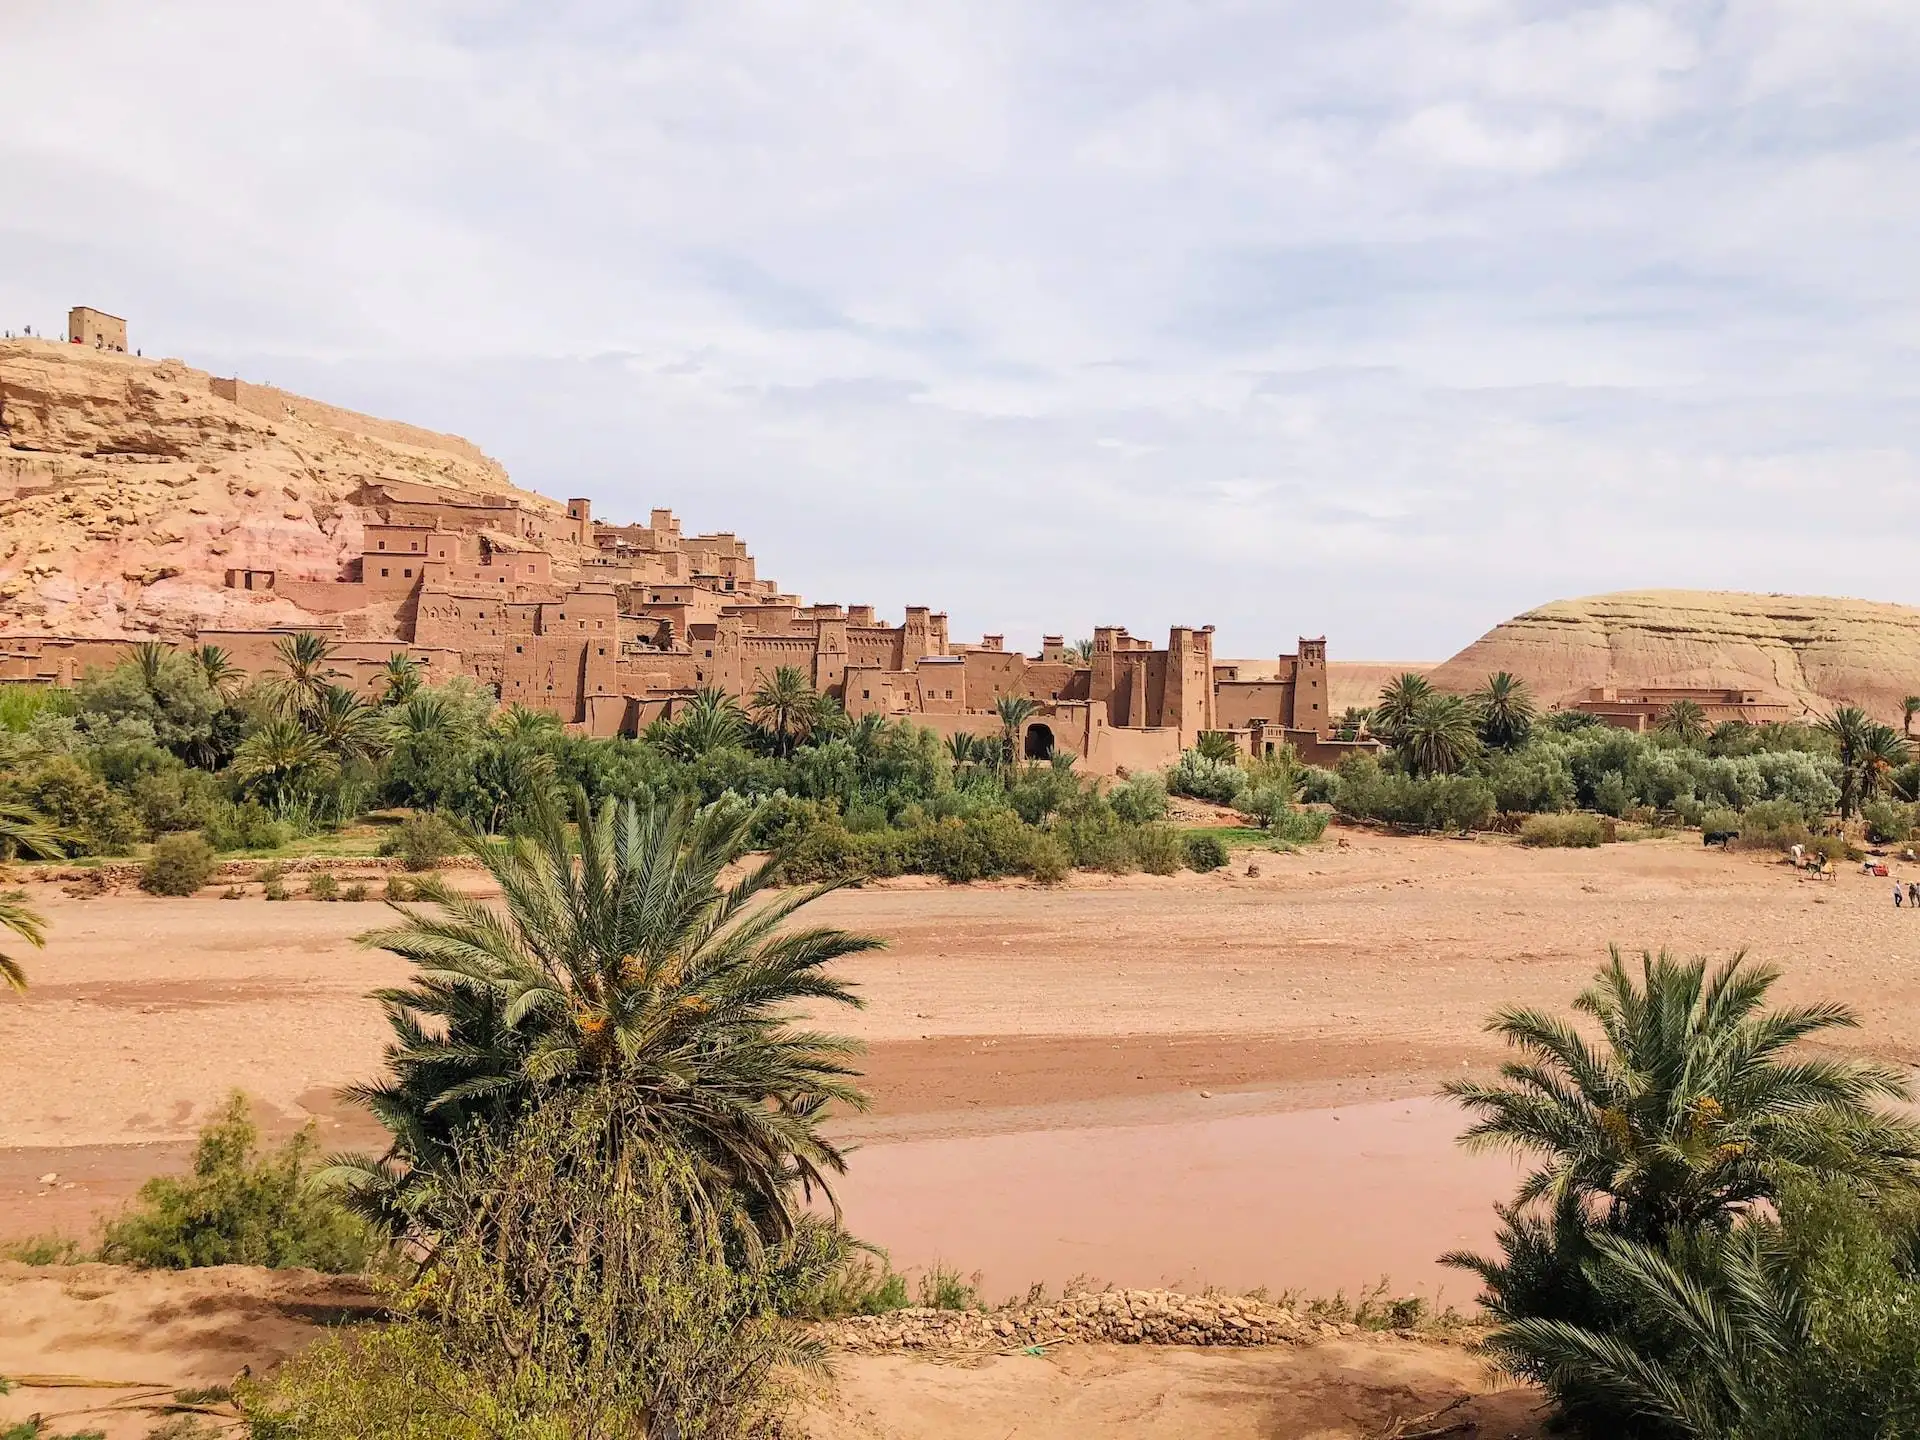 cristiano pinto knB5iCogf5Q unsplash 1 1 - Morocco Private Tours - Best Morocco Tours - Morocco Desert Tours